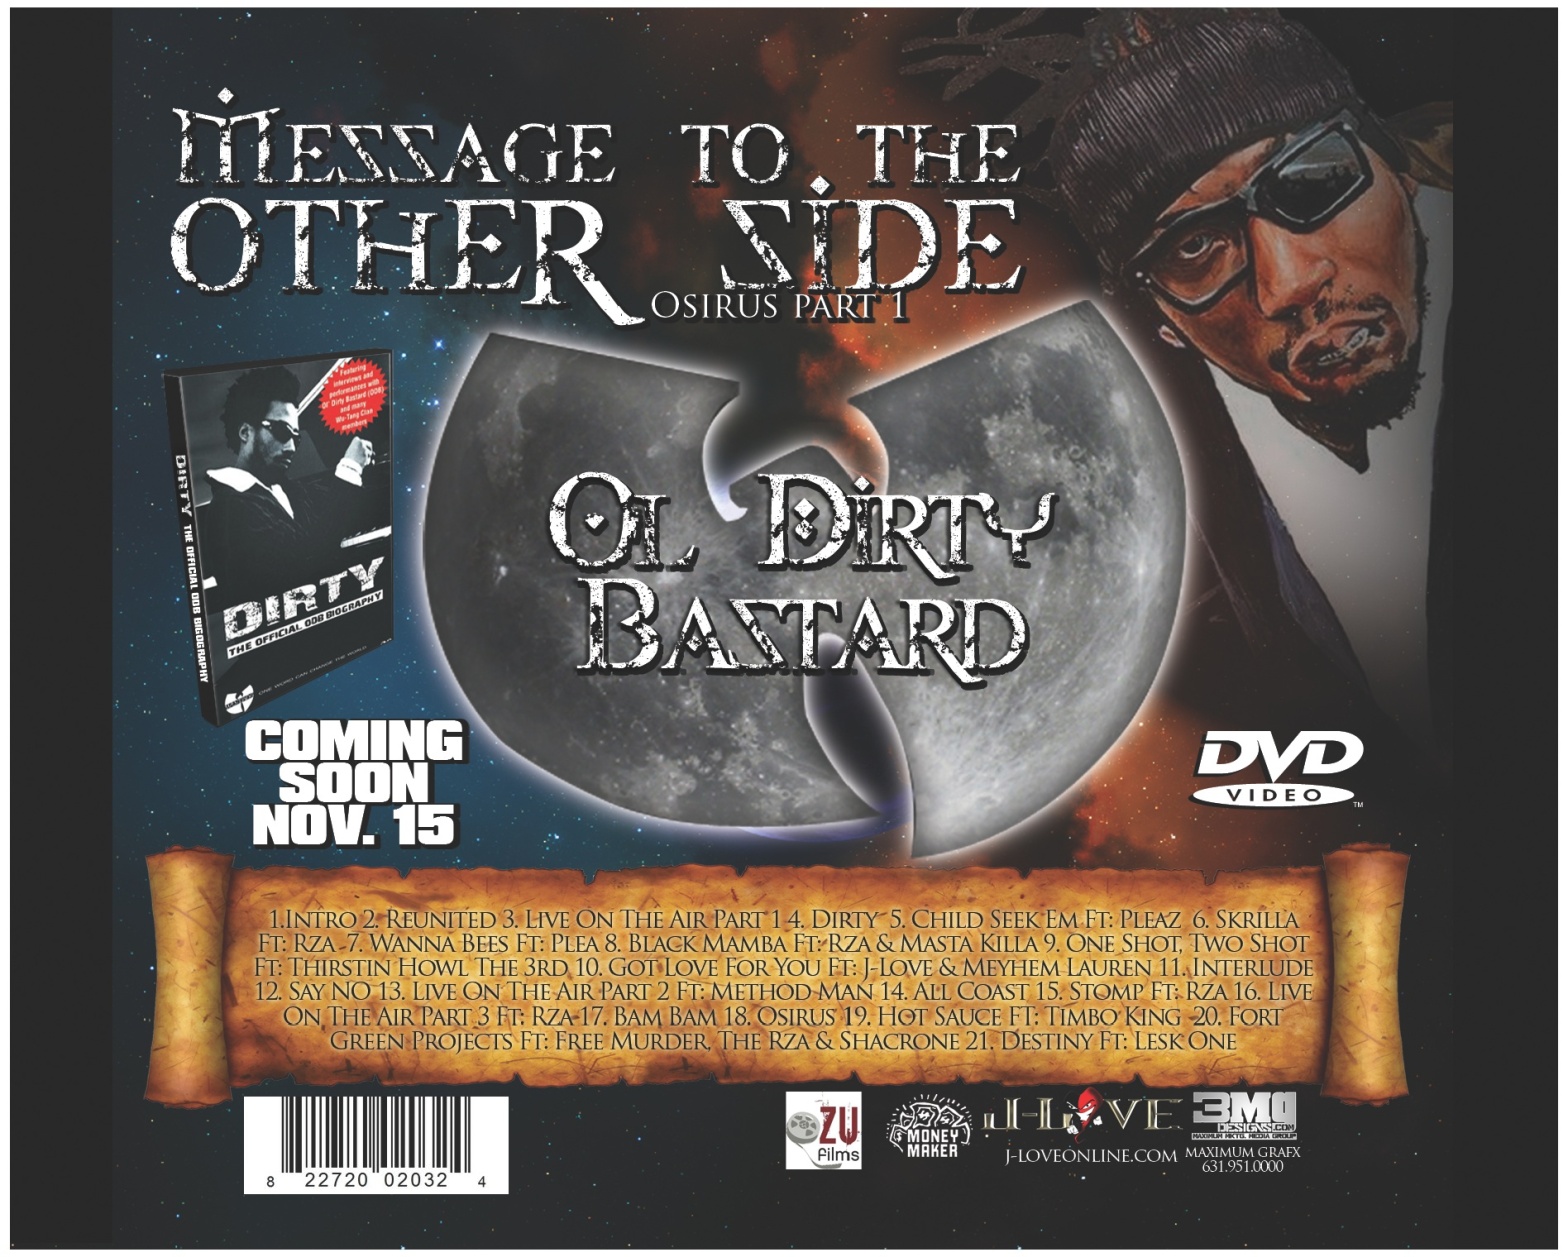 CD Design: Ol Dirty Bastard. Message to the other side